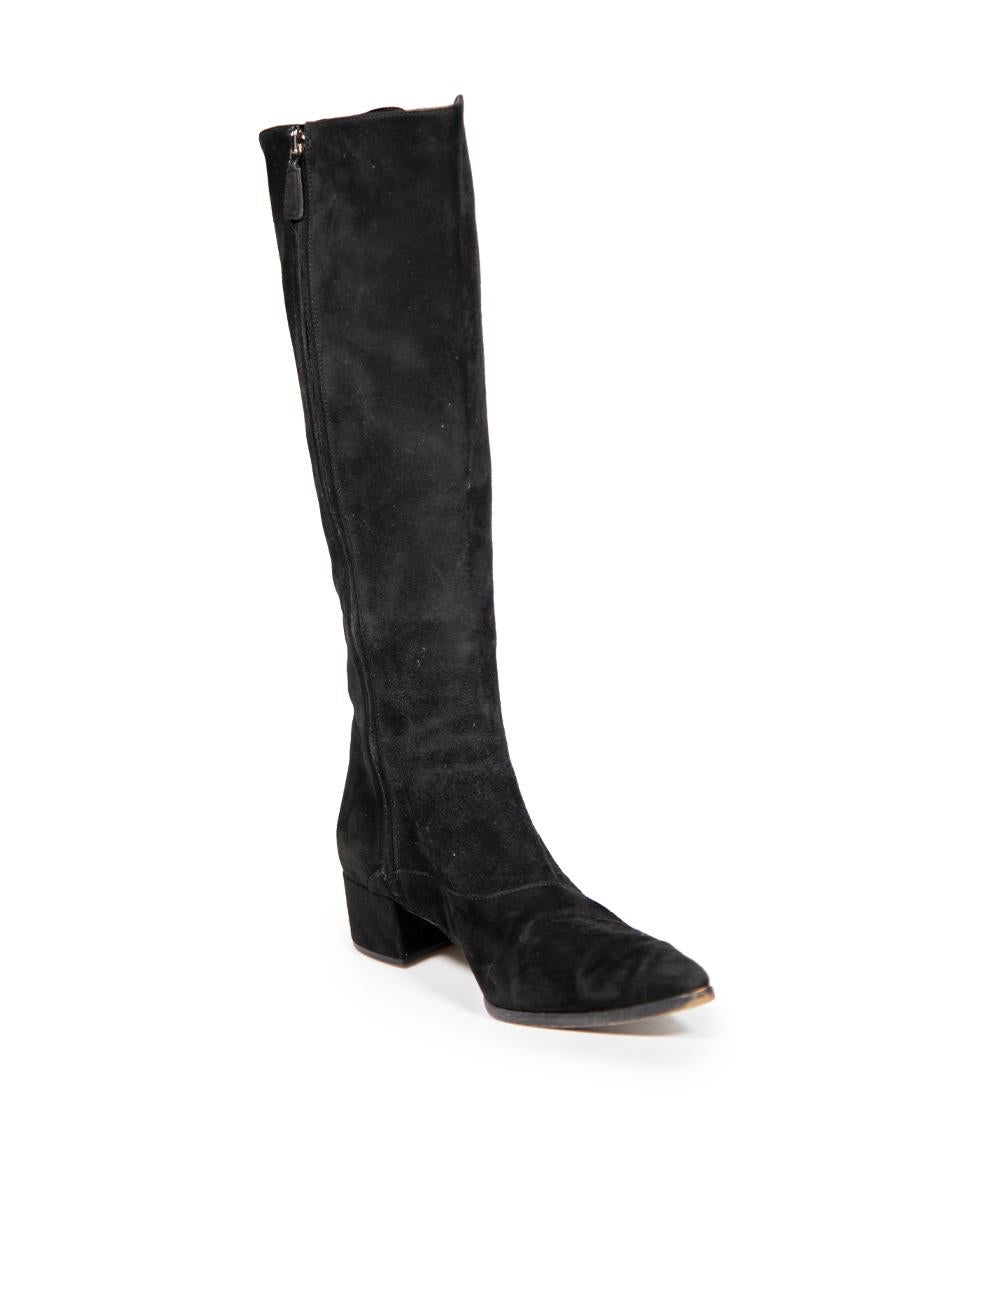 CONDITION is Good. Minor wear to boots is evident. Light wear to both sides and heels of both boots with abrasions and marks to the suede on this used Prada designer resale item.
 
 Details
 Black
 Suede
 Knee high boots
 Pointed toe
 Kitten block